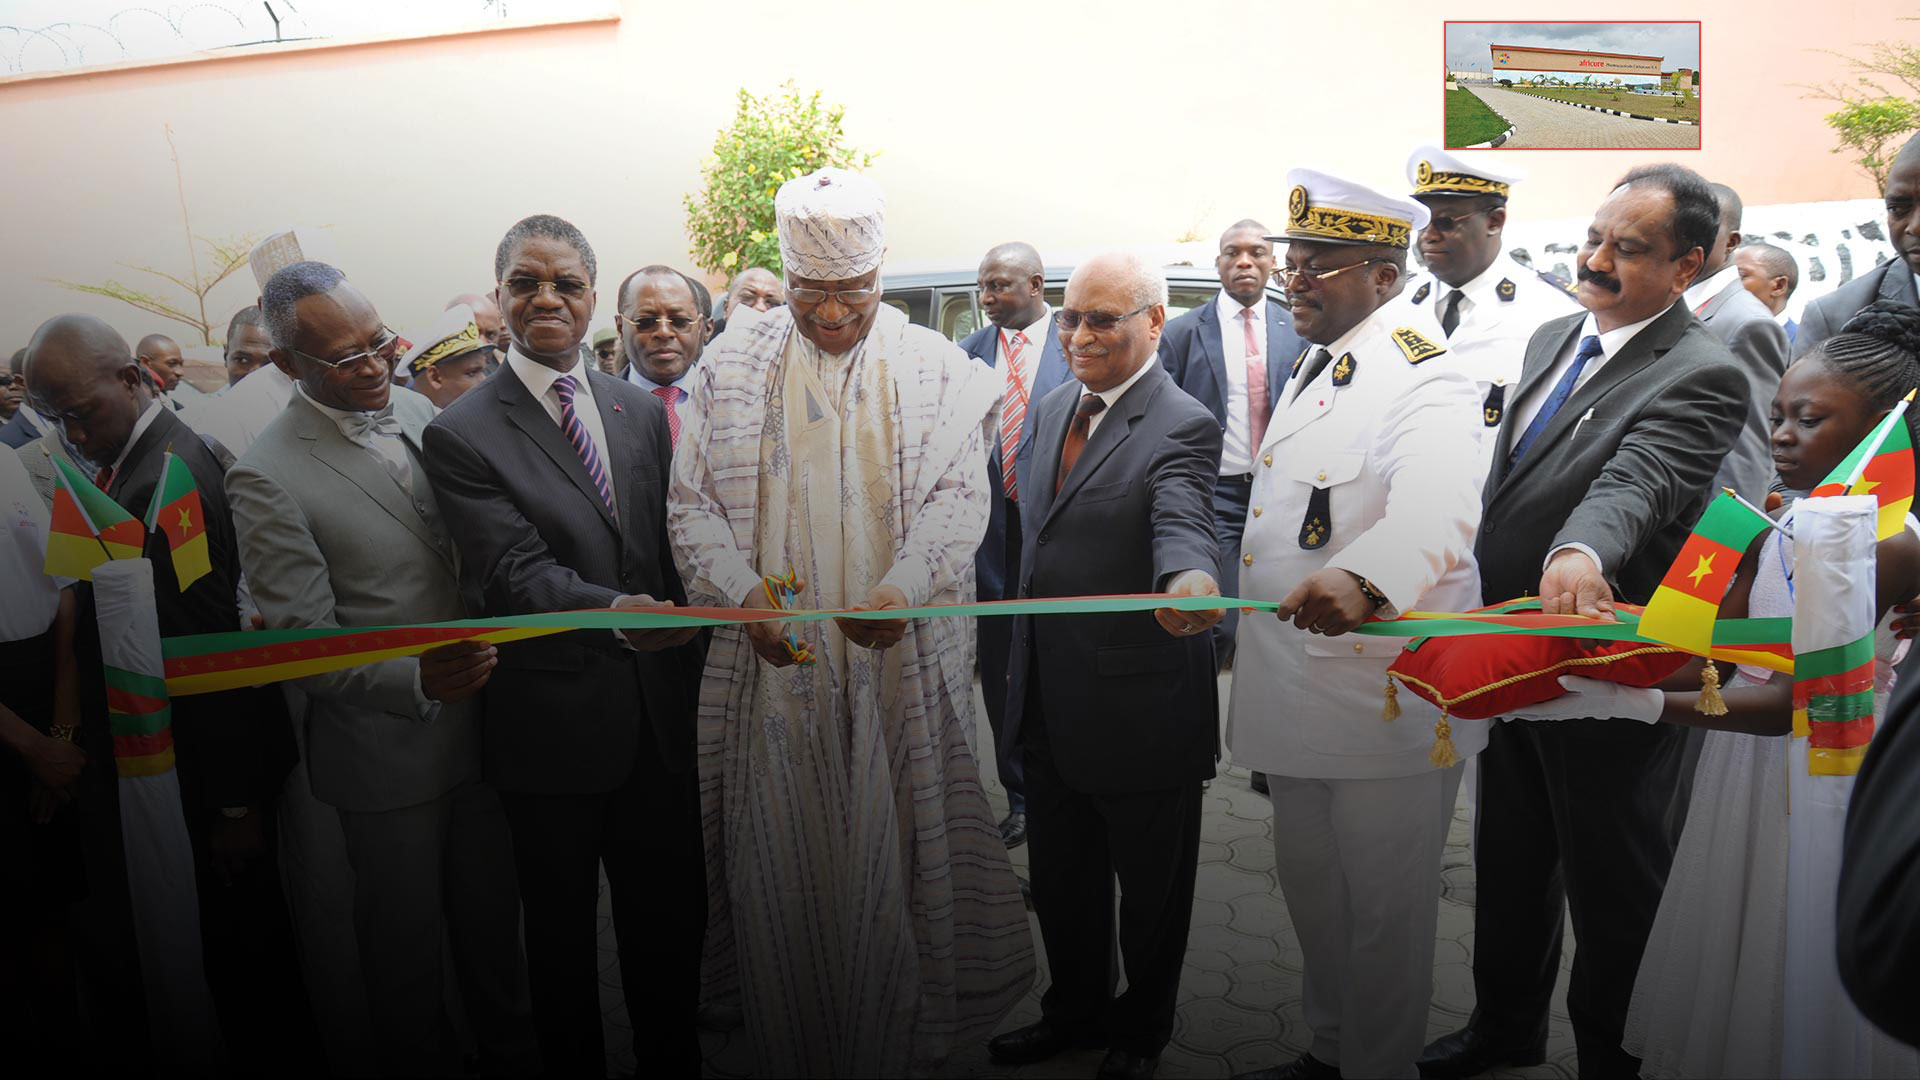 Cameroon Plant being inaugurated by the Prime Minister of Cameroon